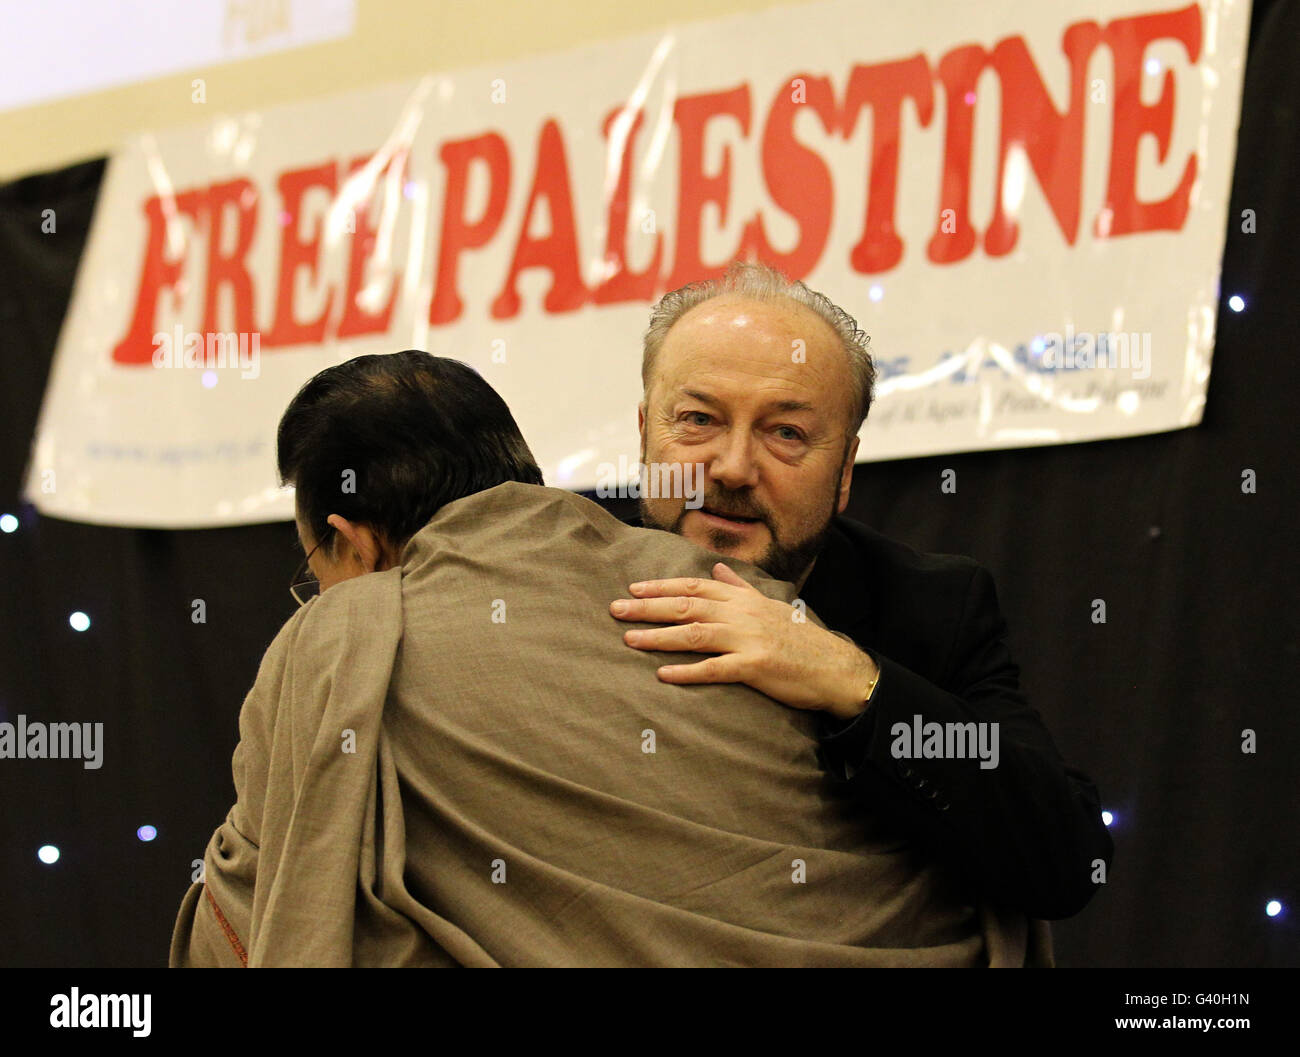 Former MP George Galloway during his speech at the Central Mosque in Glasgow, after he said he may end his political career in Scotland if he secured a seat in this year's Scottish Parliament election. Stock Photo